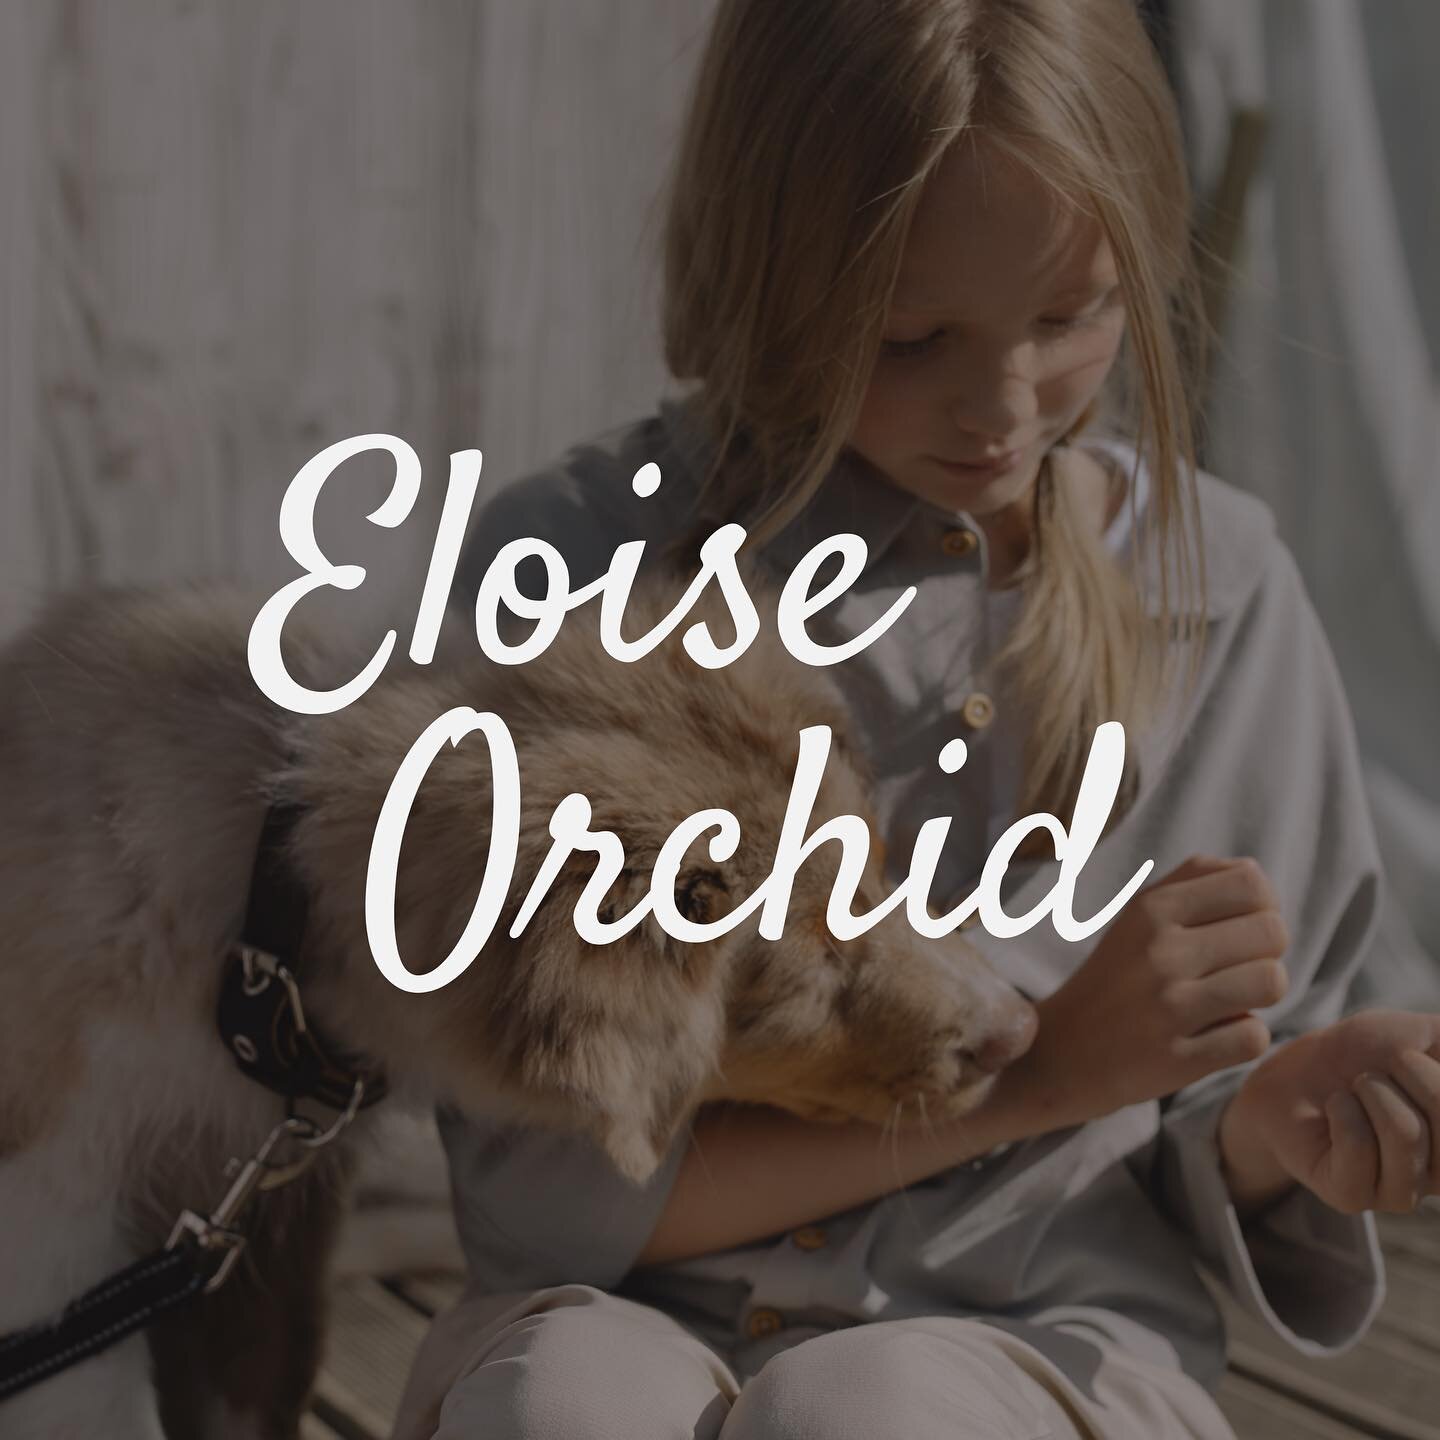 Where Timeless Fashion Meets Youthful Grace ✨

At last, I&rsquo;m excited to reveal the brand identity for Eloise Orchid, an upscale clothing brand for young girls. 

Crafting this project was such a joy, however, we aren&rsquo;t finished yet. Exciti